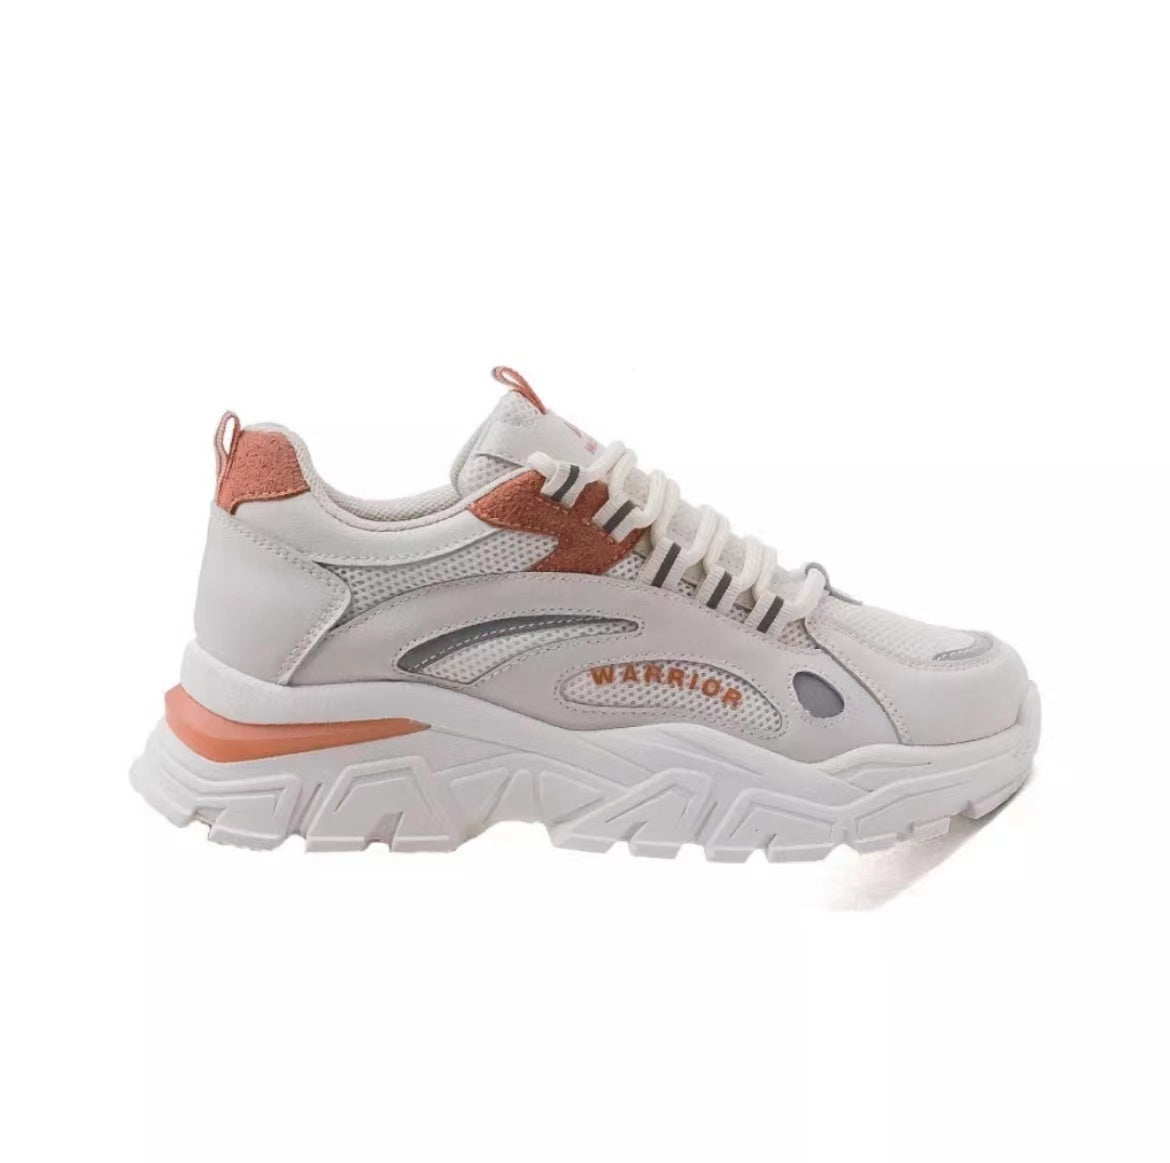 Warrior Thick Sole Height Increasing Dad Shoes - White/Orange